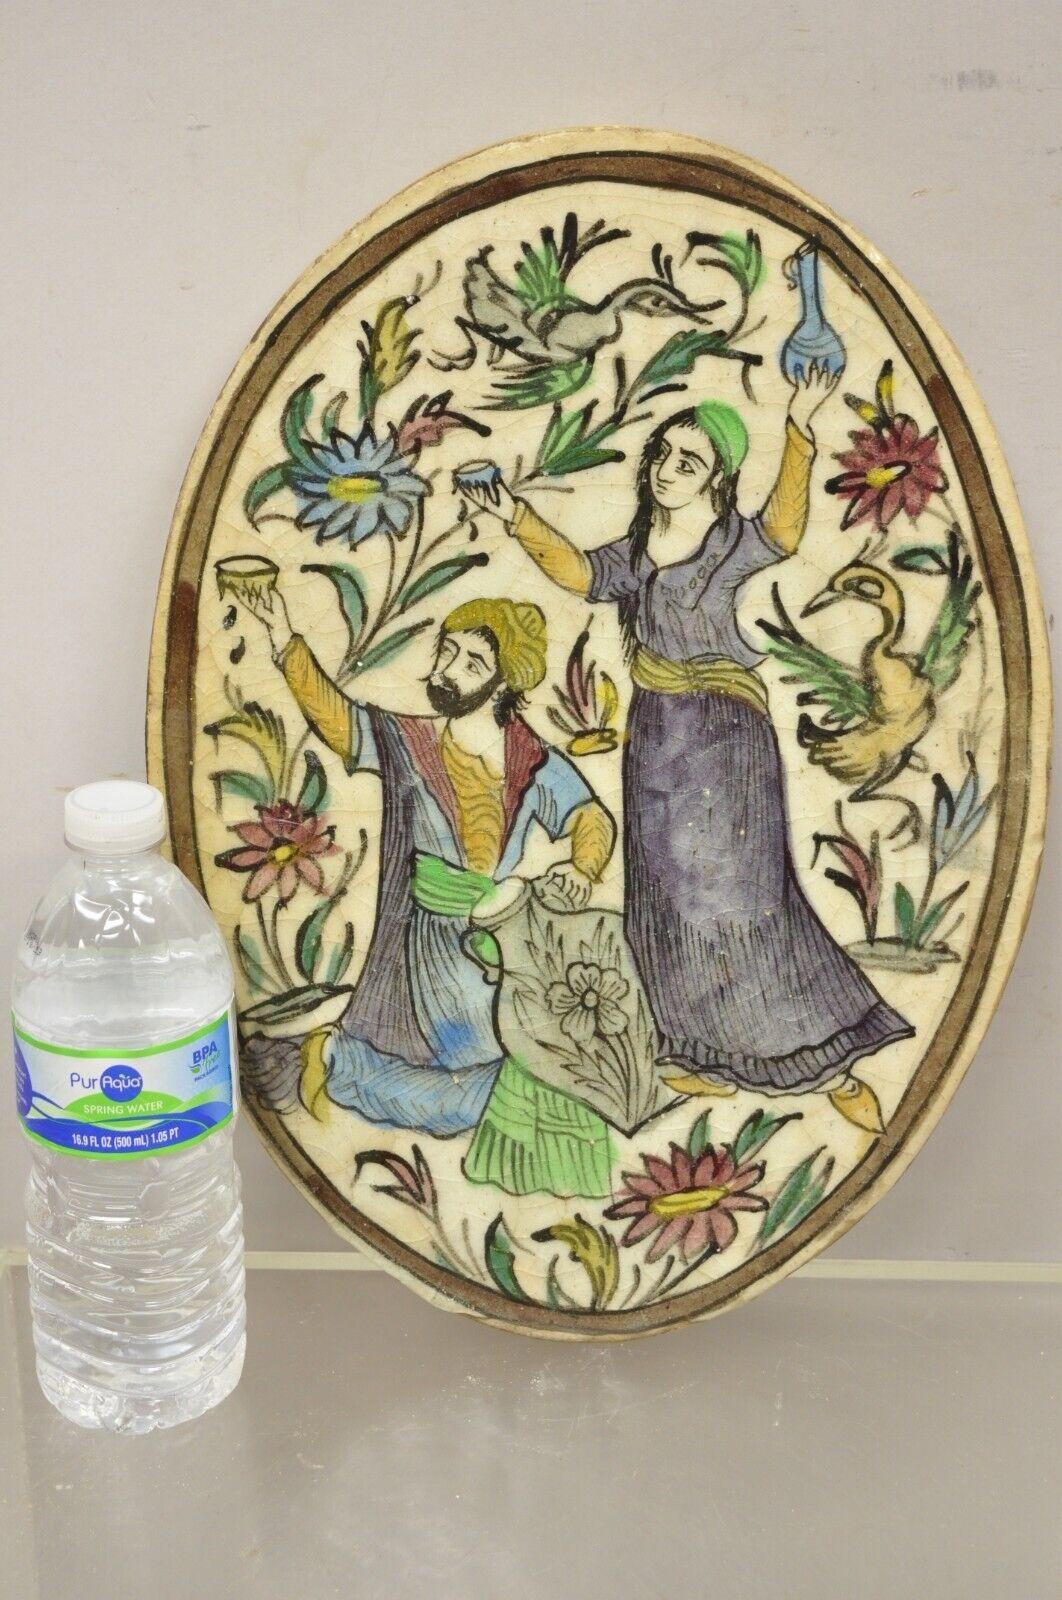 Antique Persian Iznik Qajar style ceramic pottery oval tile woman and man with jugs C3. Item features original crackle glazed finish, heavy ceramic pottery construction, very impressive detail, wonderful style and form. Great to mount as wall art or